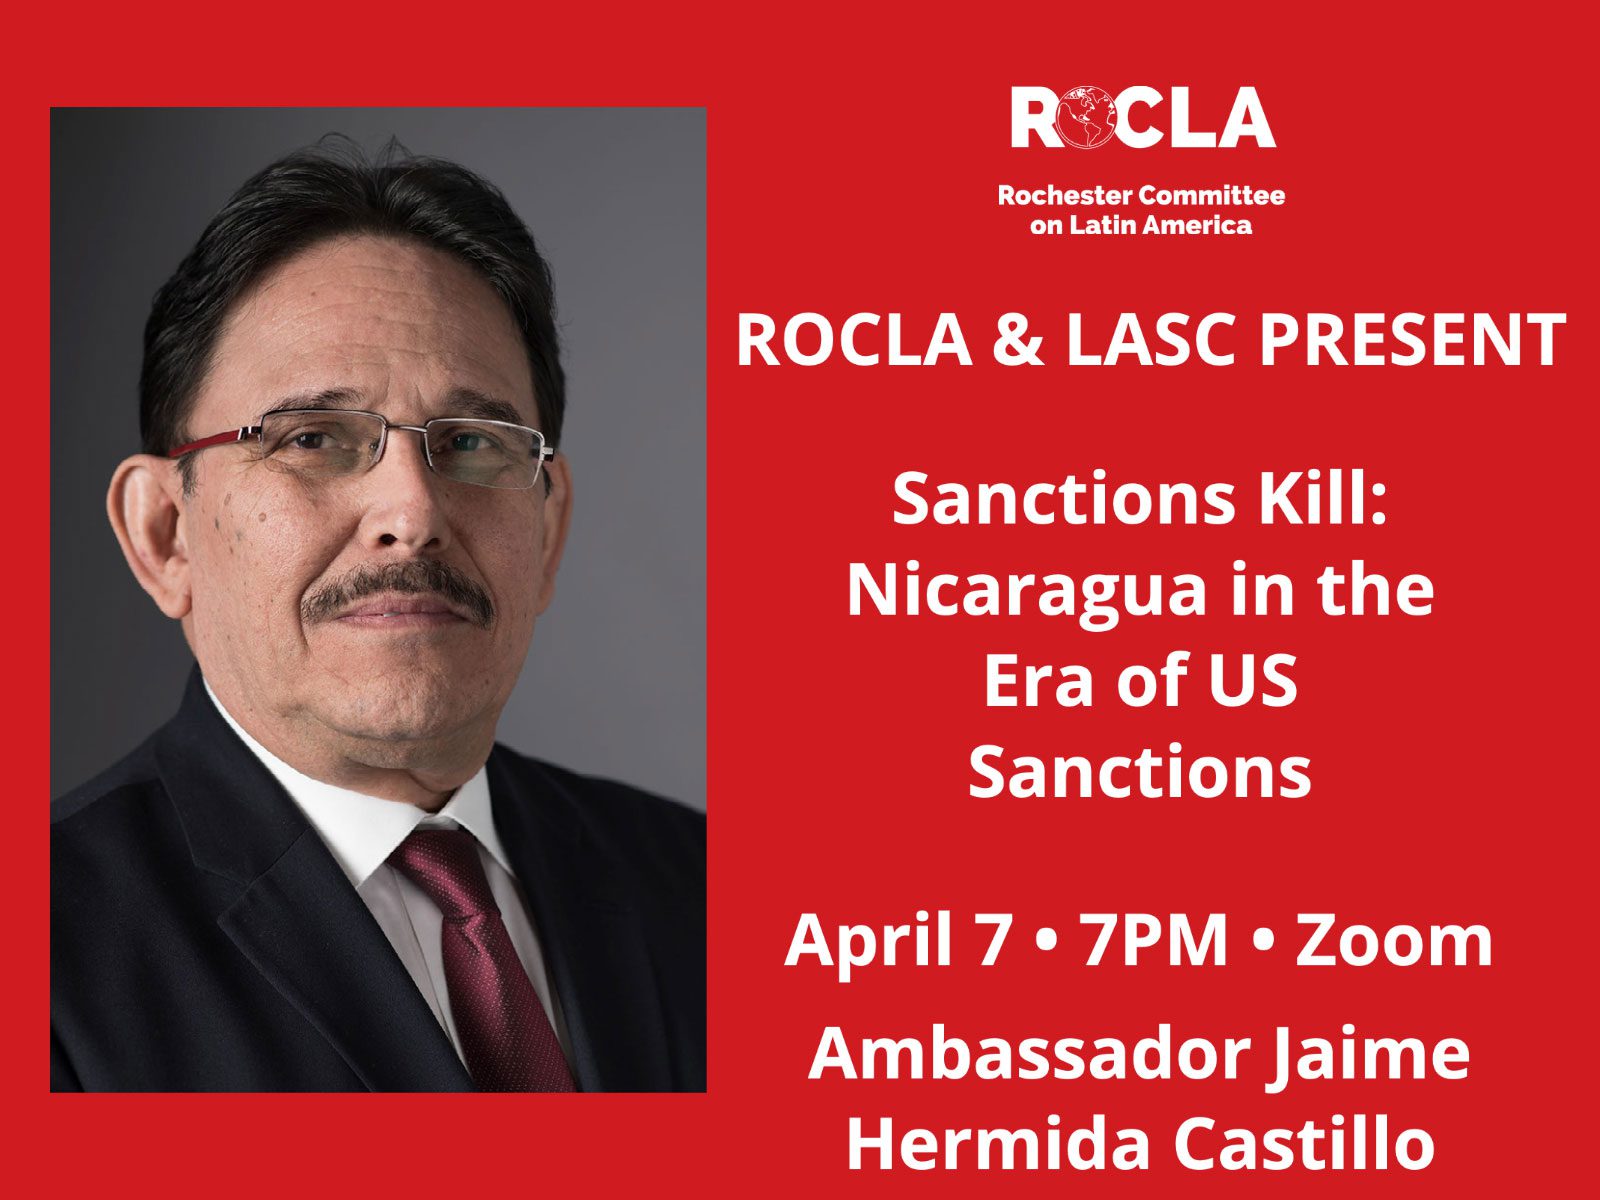 Sanctions Kill: Nicaragua in the Era of US Sanctions